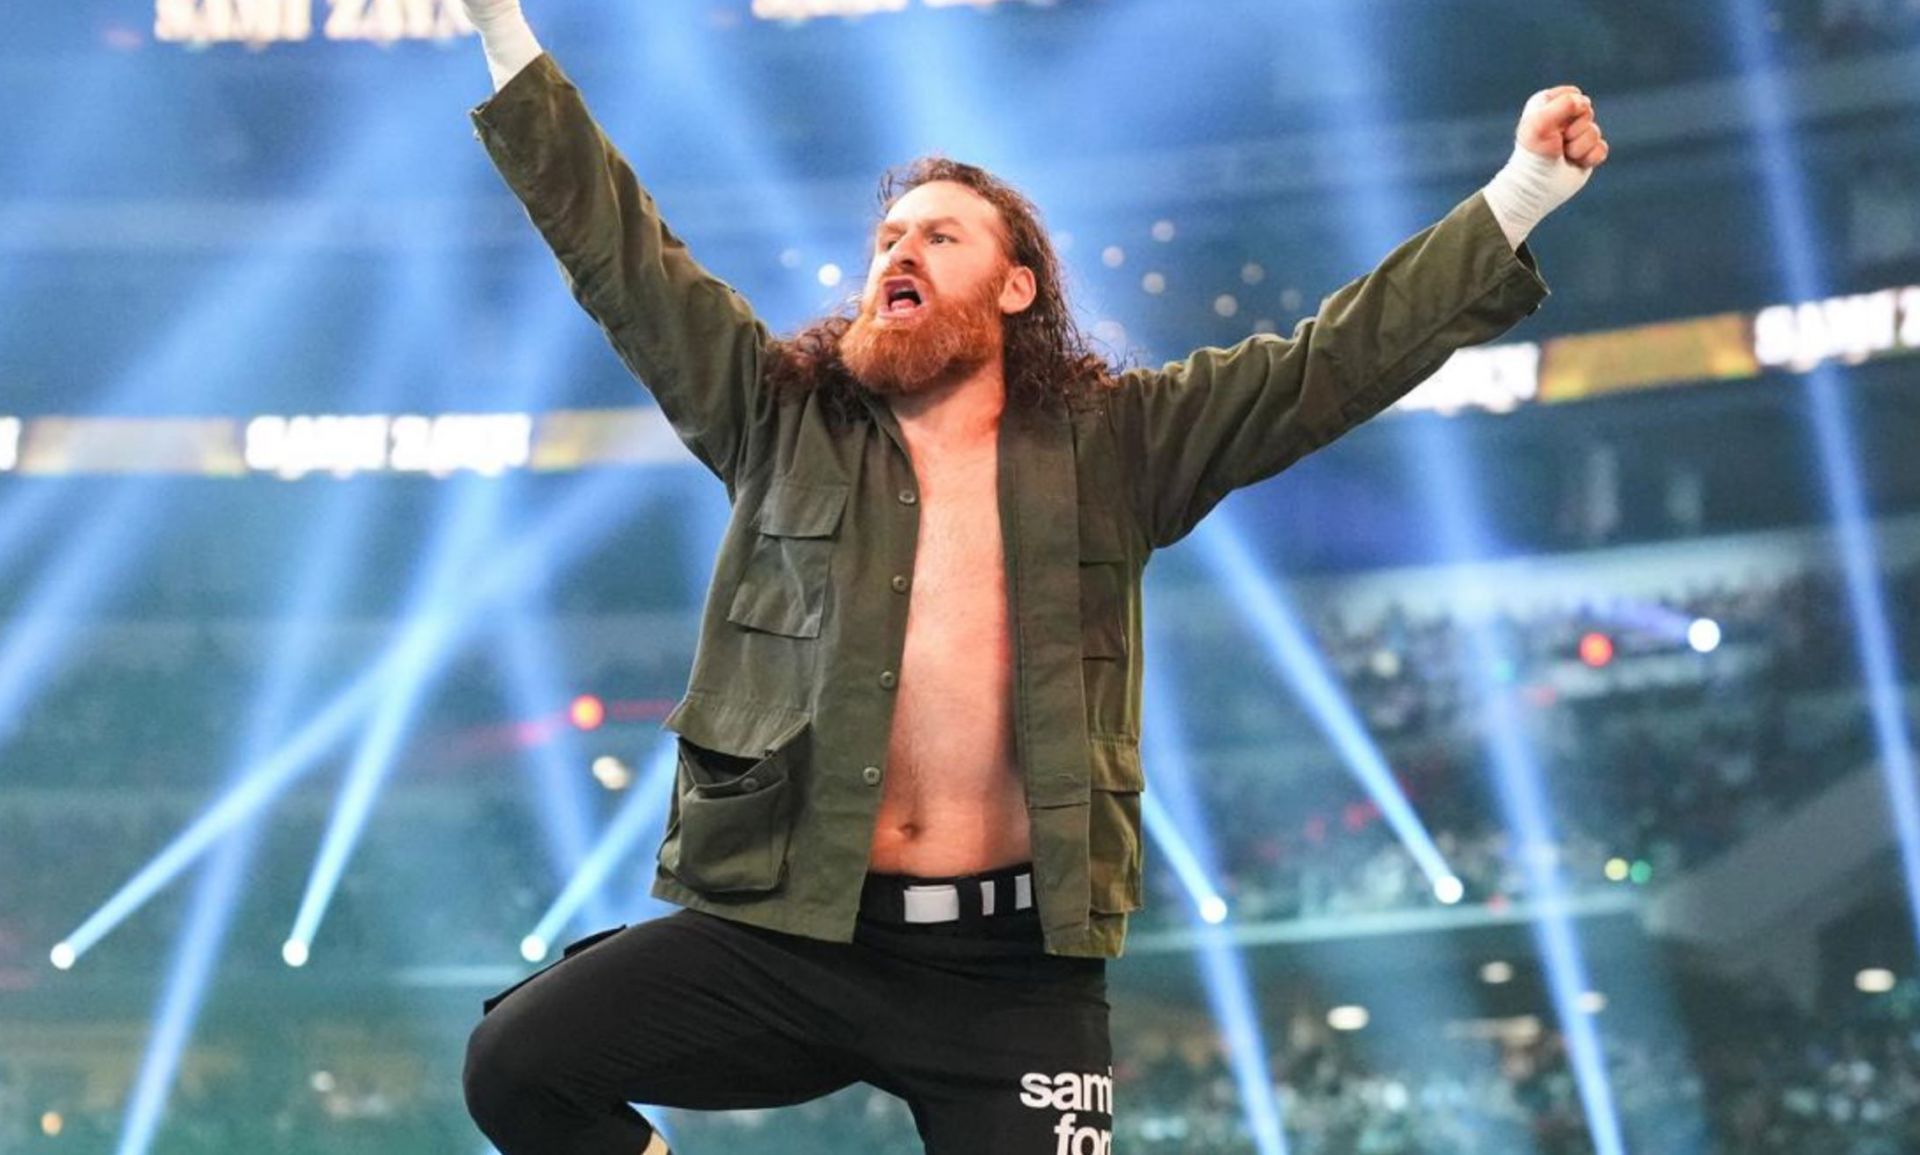 Sami Zayn competed at WrestleMania 38 in an Anything Goes Match